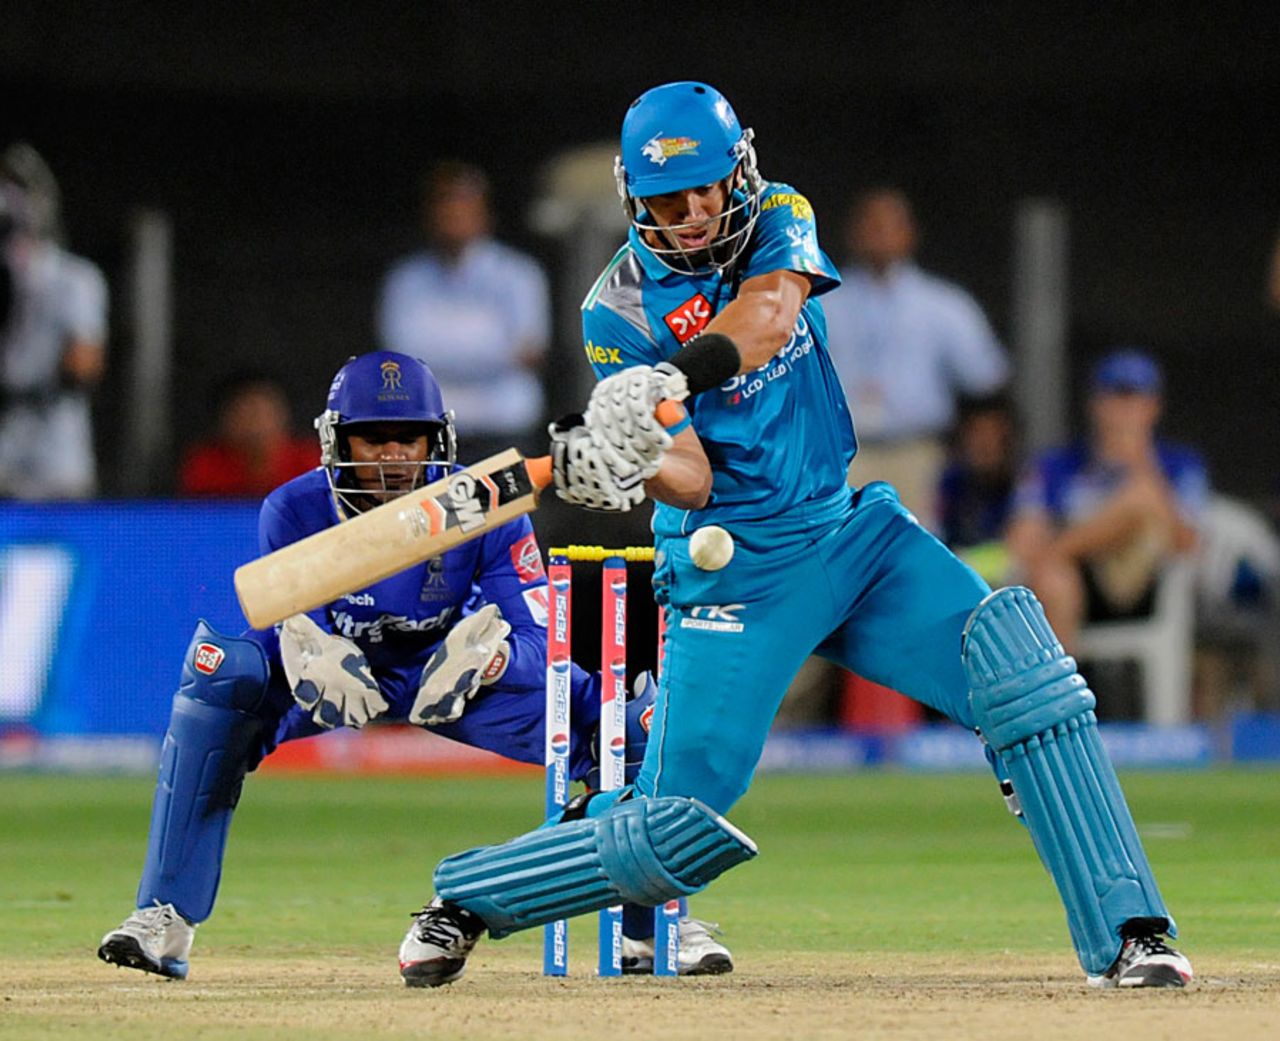 Ross Taylor about to play the slog sweep, Pune Warriors v Rajasthan Royals, IPL, Pune, April 11, 2013